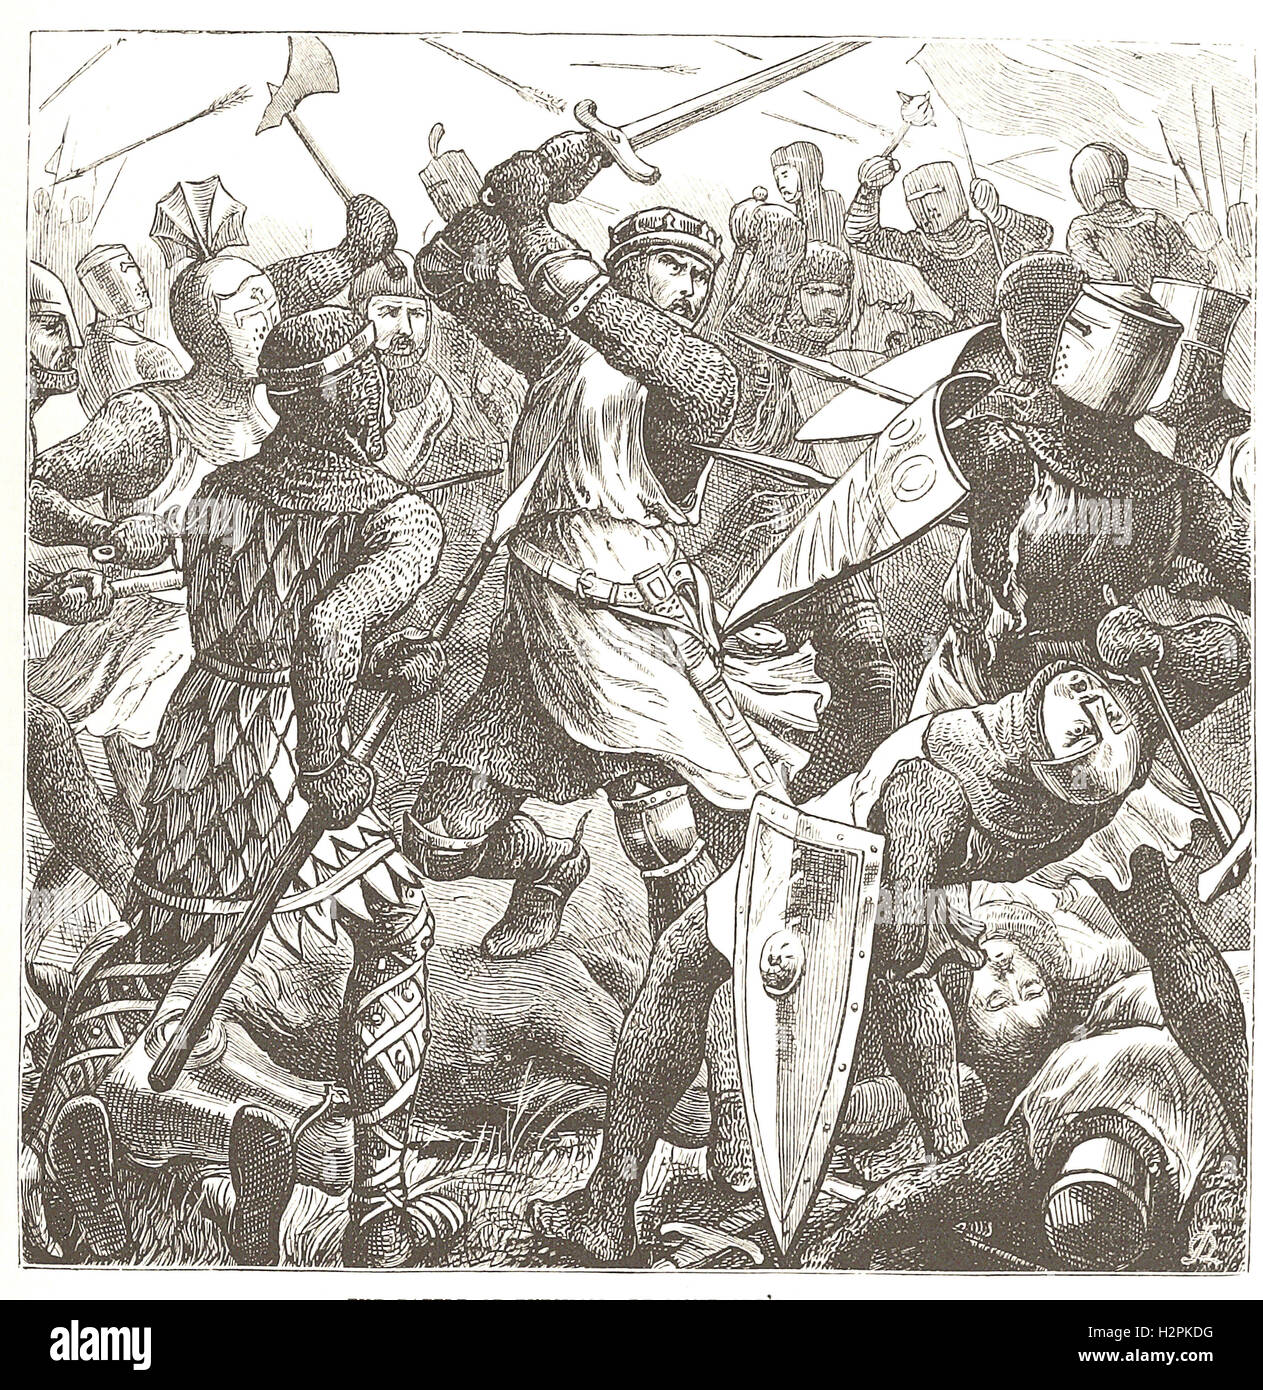 THE BATTLE OF EVESHAM : DE MONTFORT’s LAST STAND - from 'Cassell's Illustrated Universal History' - 1882 Stock Photo